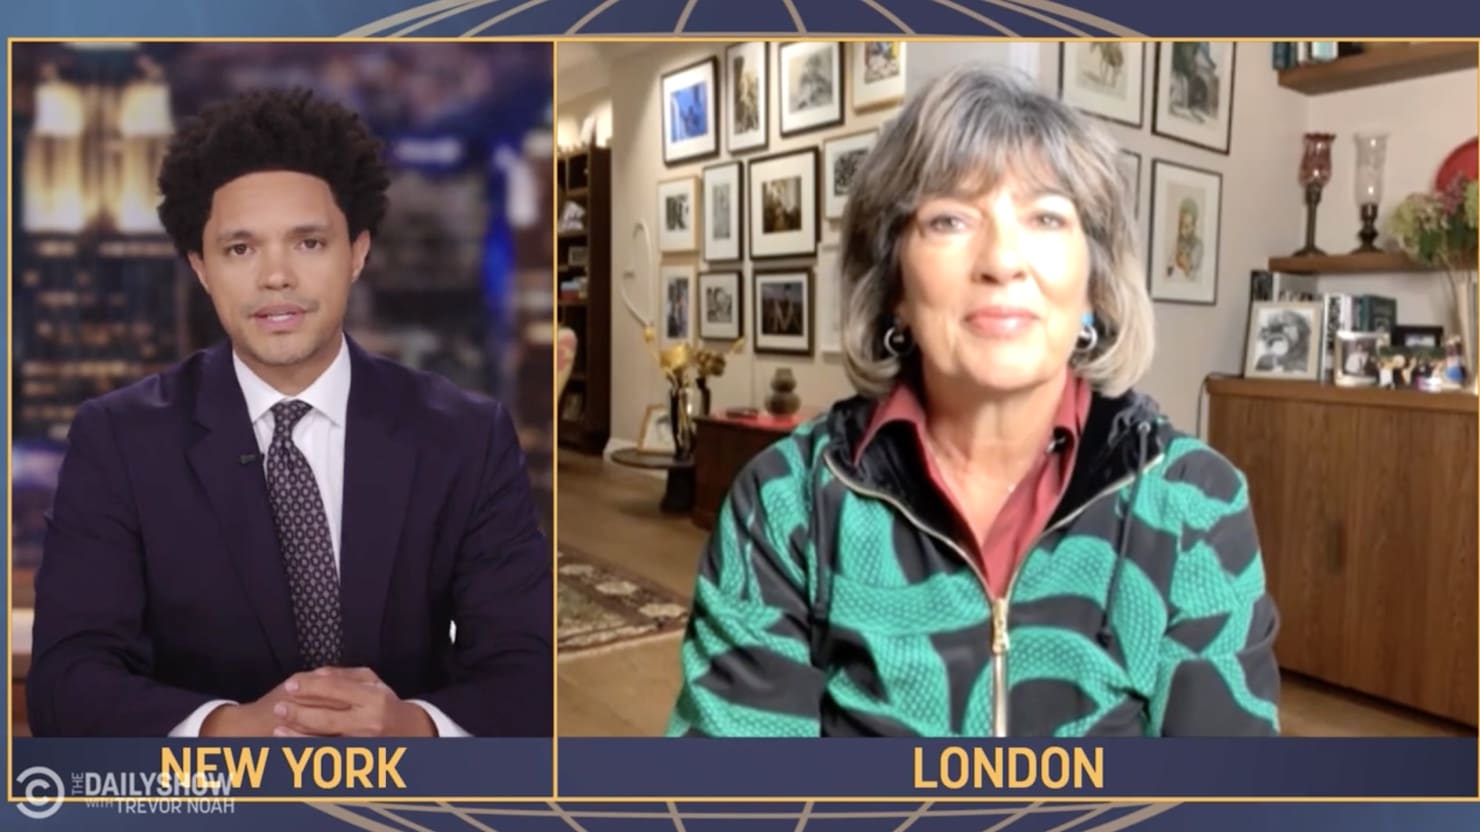 Christiane Amanpour Reveals on ‘Daily Show’ Why She Was Never Going to Put on That Headscarf